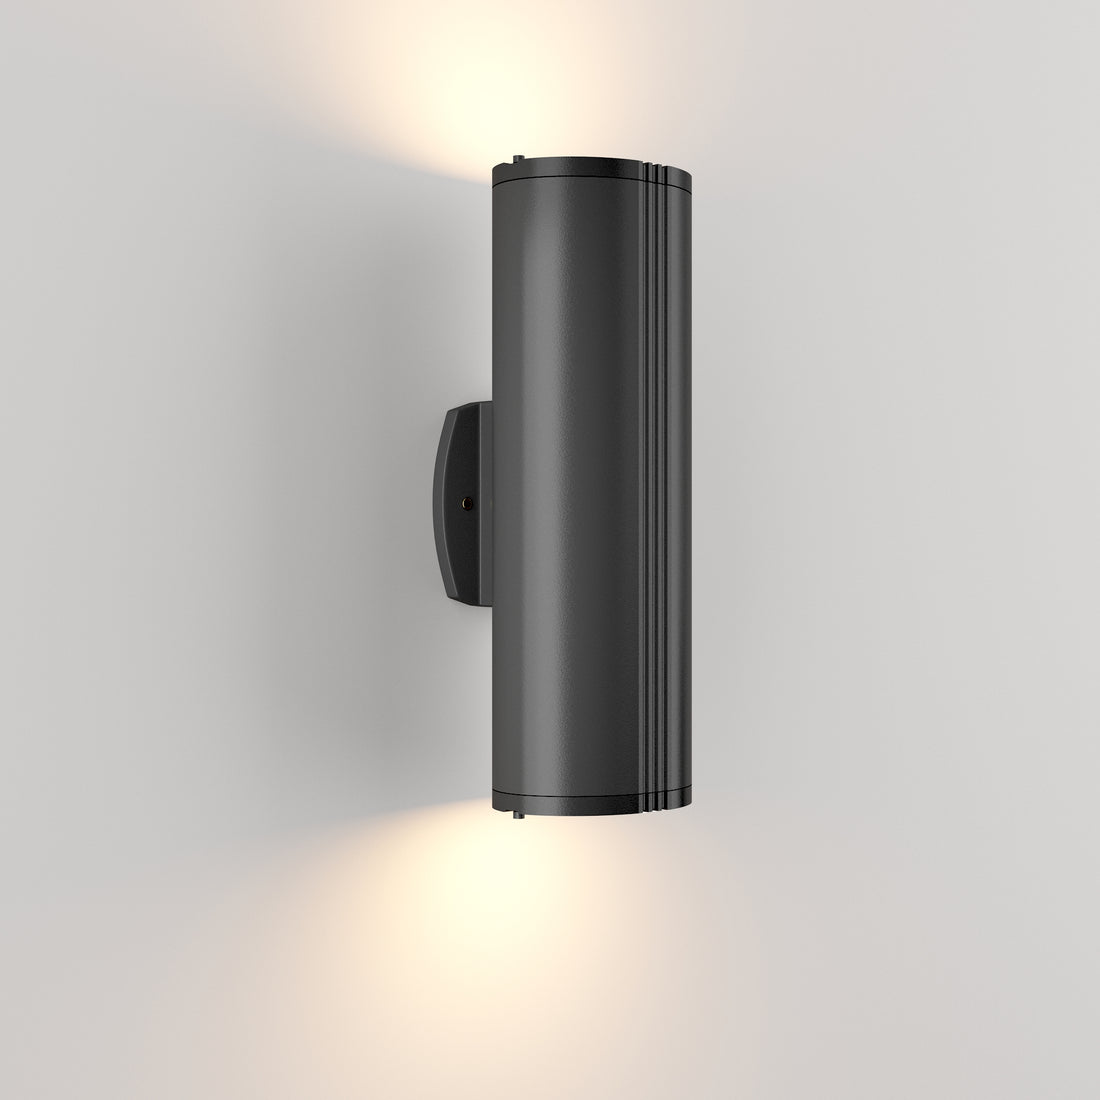 Evolution • Oval lined wall light with integrated LED 10 watts [1822]